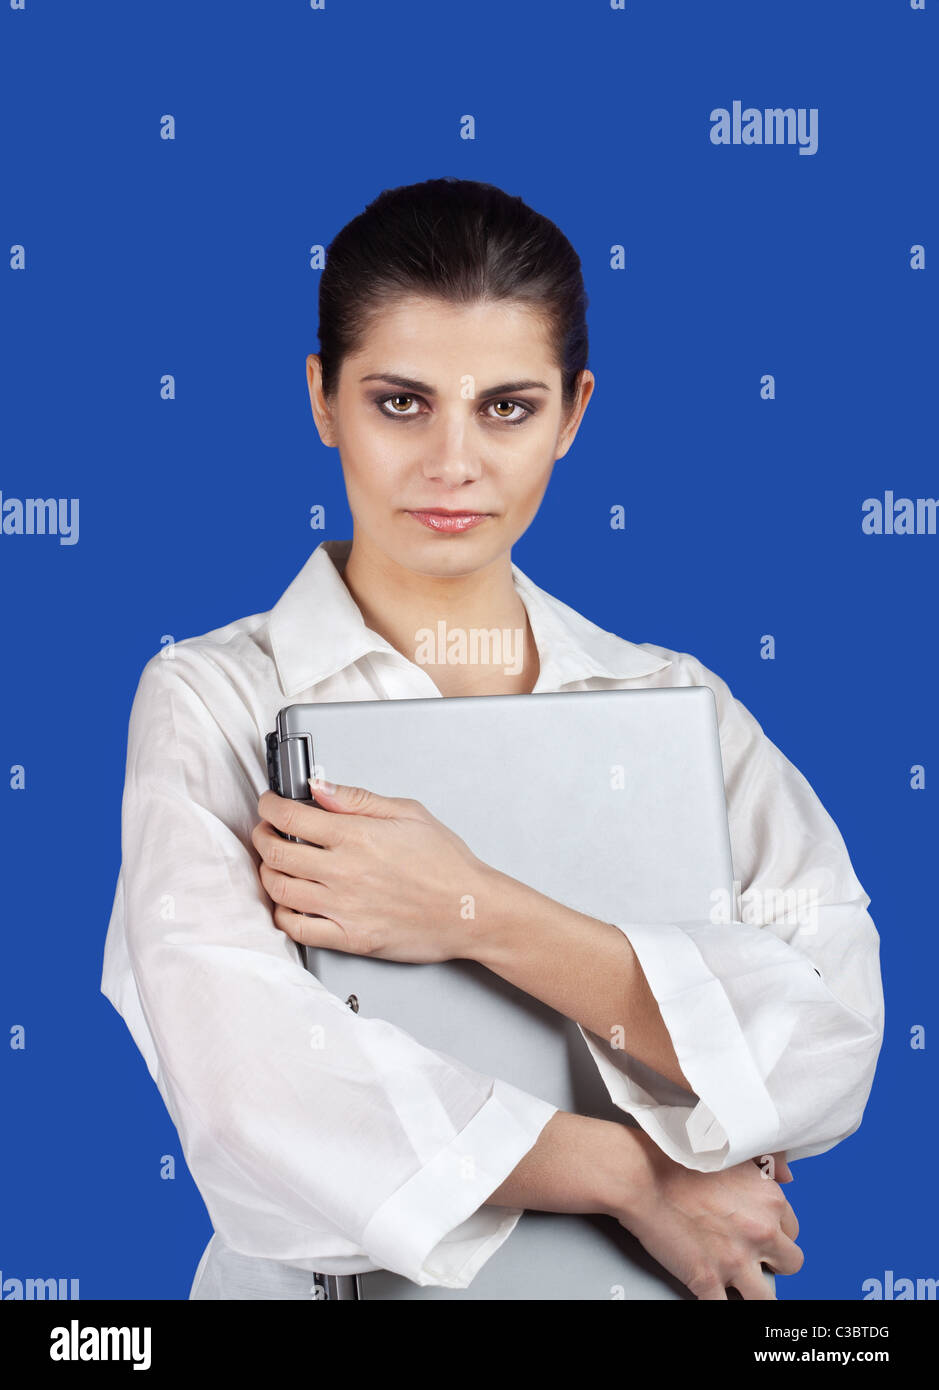 Serious young brunette woman embracing laptop computer Stock Photo